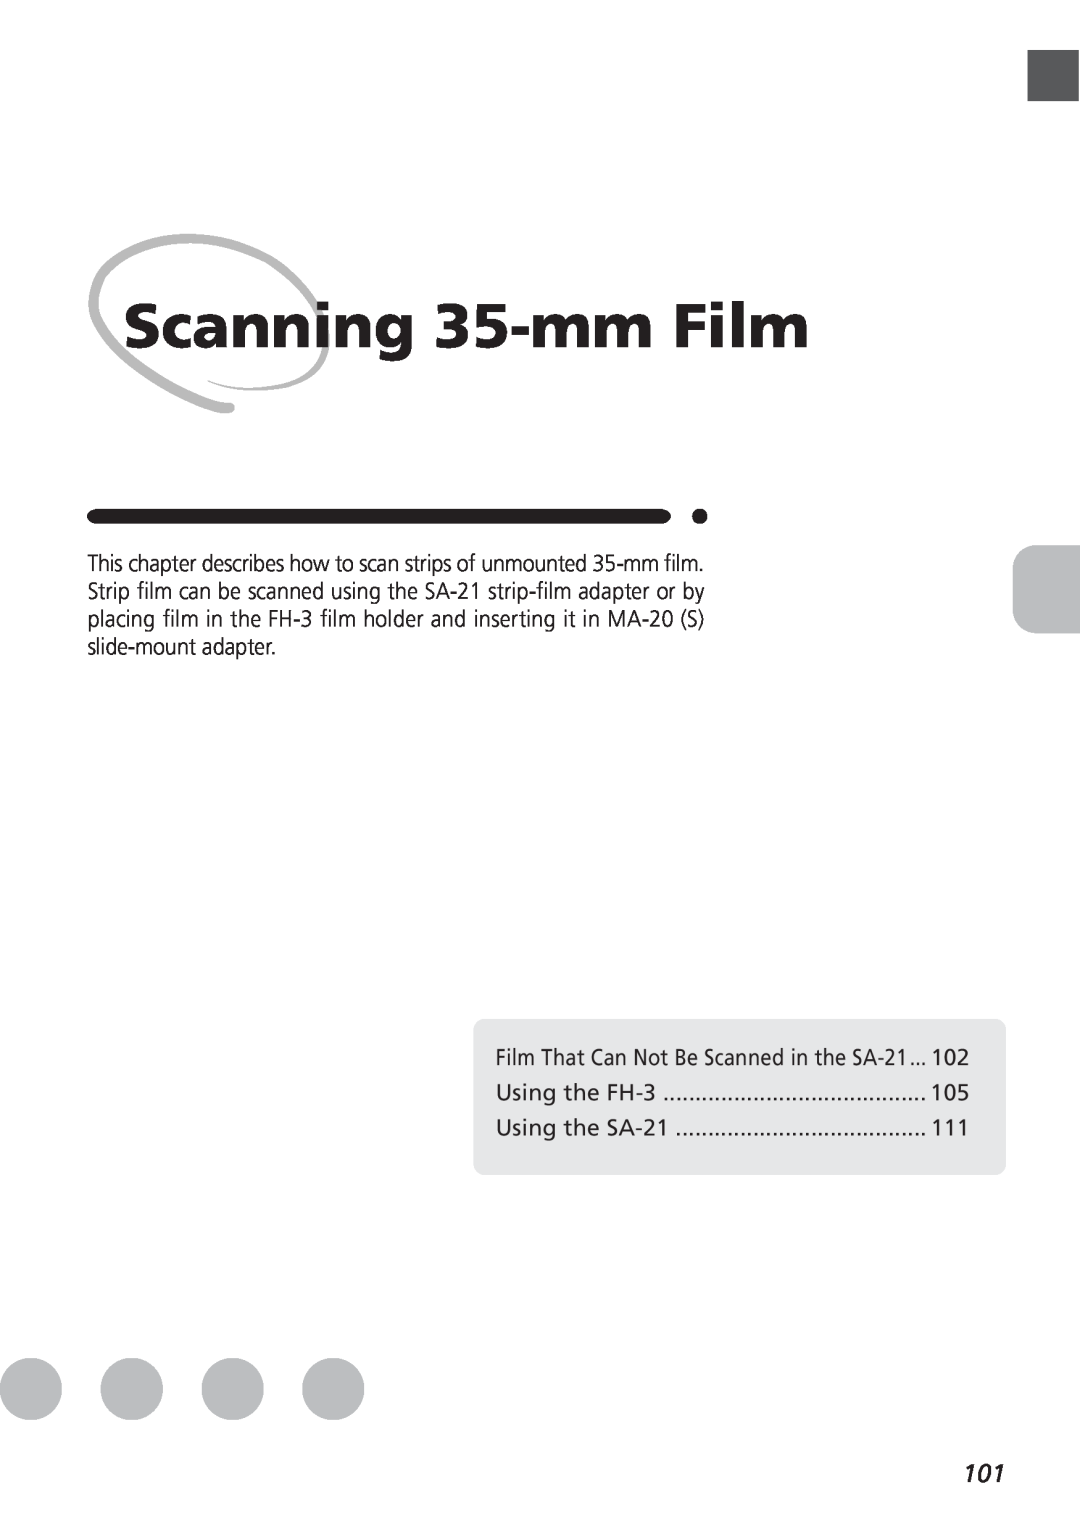 Nikon LS4000 user manual Scanning 35-mm Film, Film That Can Not Be Scanned in the SA-21, Using the FH-3, Using the SA-21 